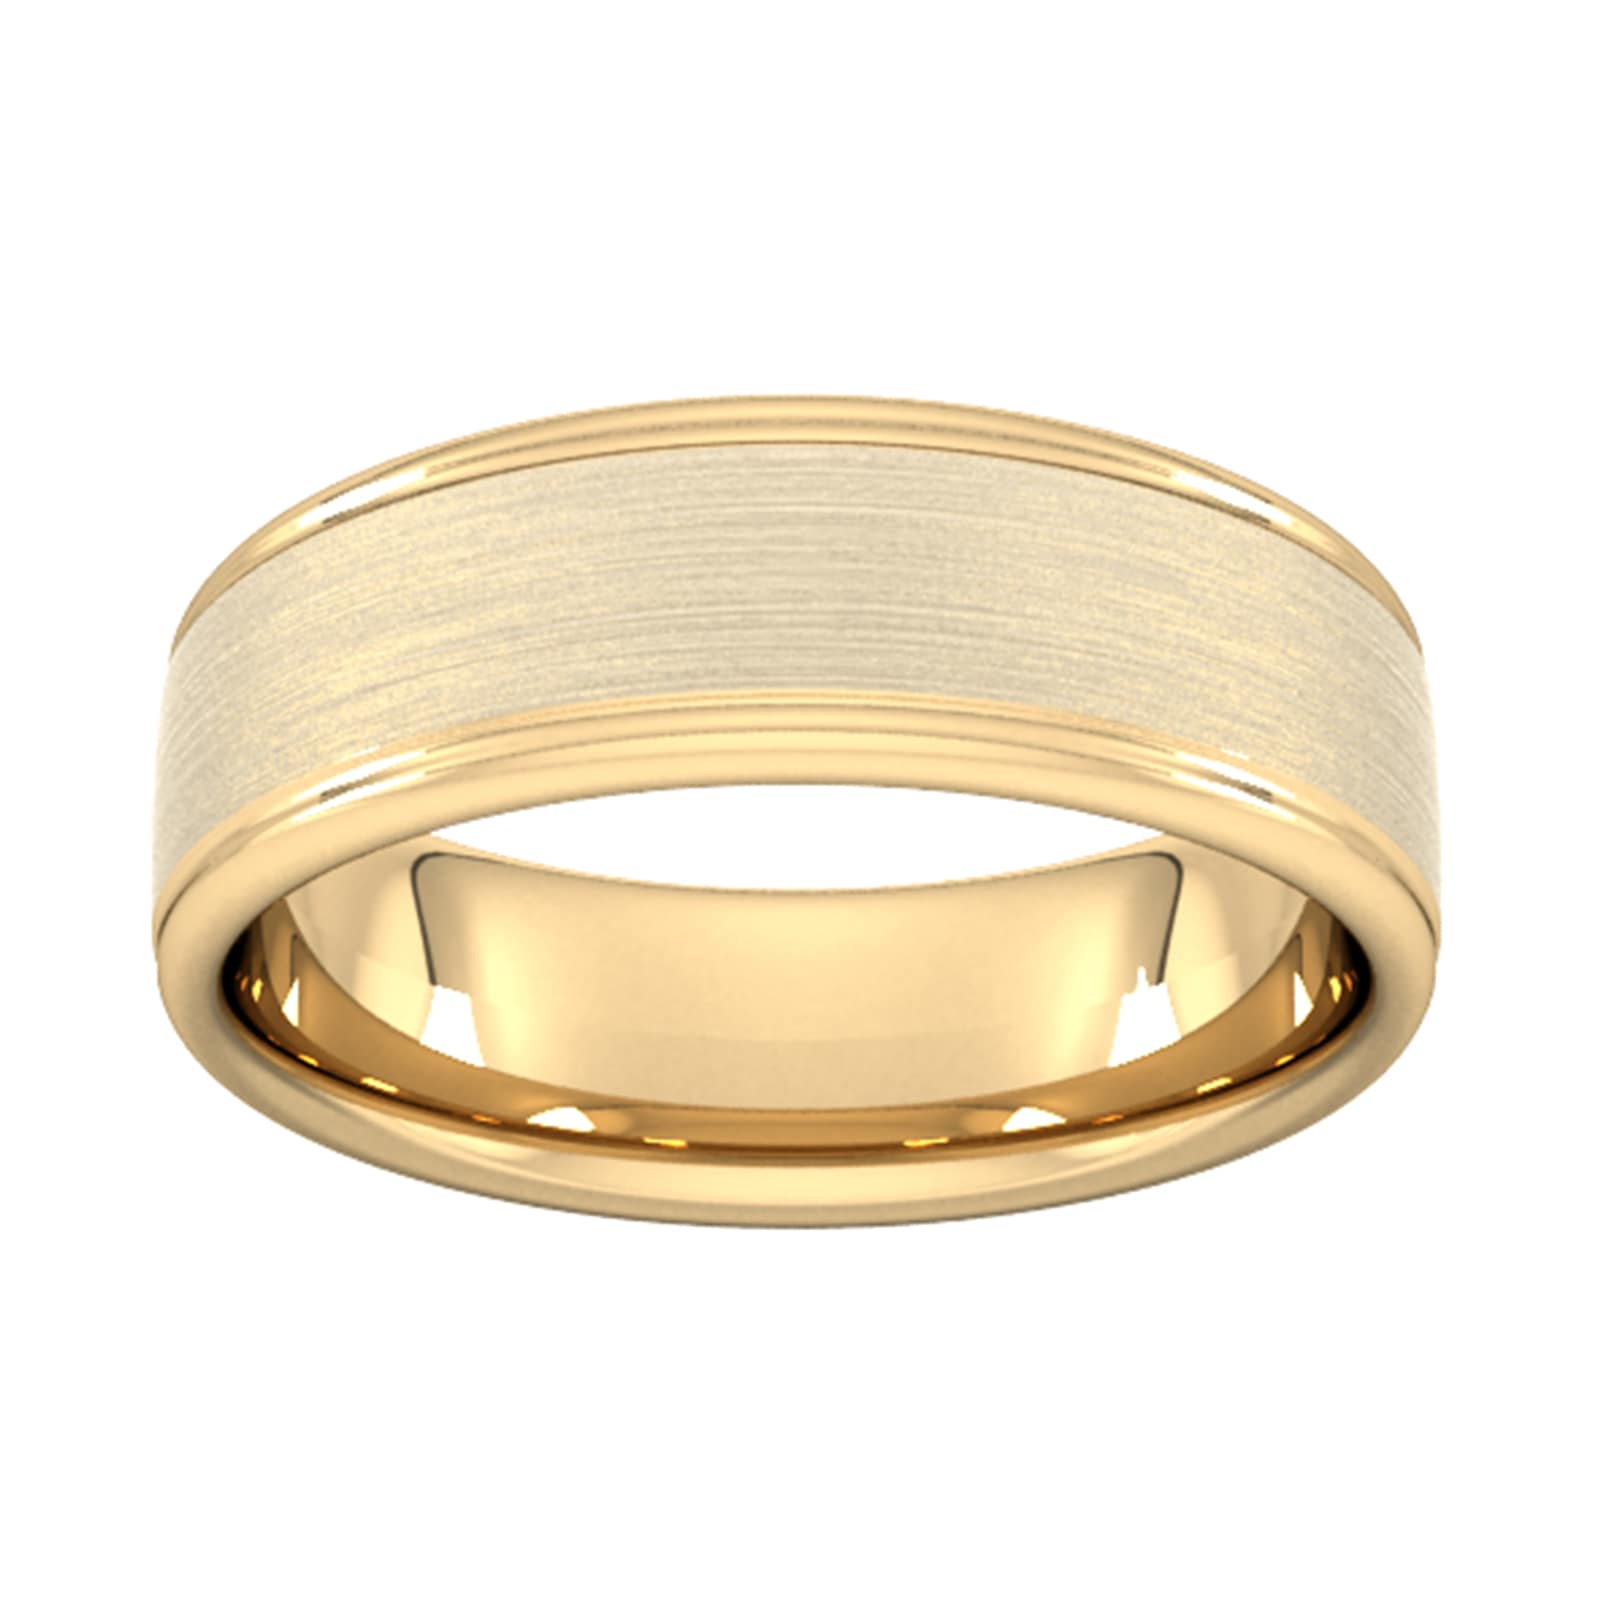 7mm Traditional Court Heavy Matt Centre With Grooves Wedding Ring In 18 Carat Yellow Gold - Ring Size T